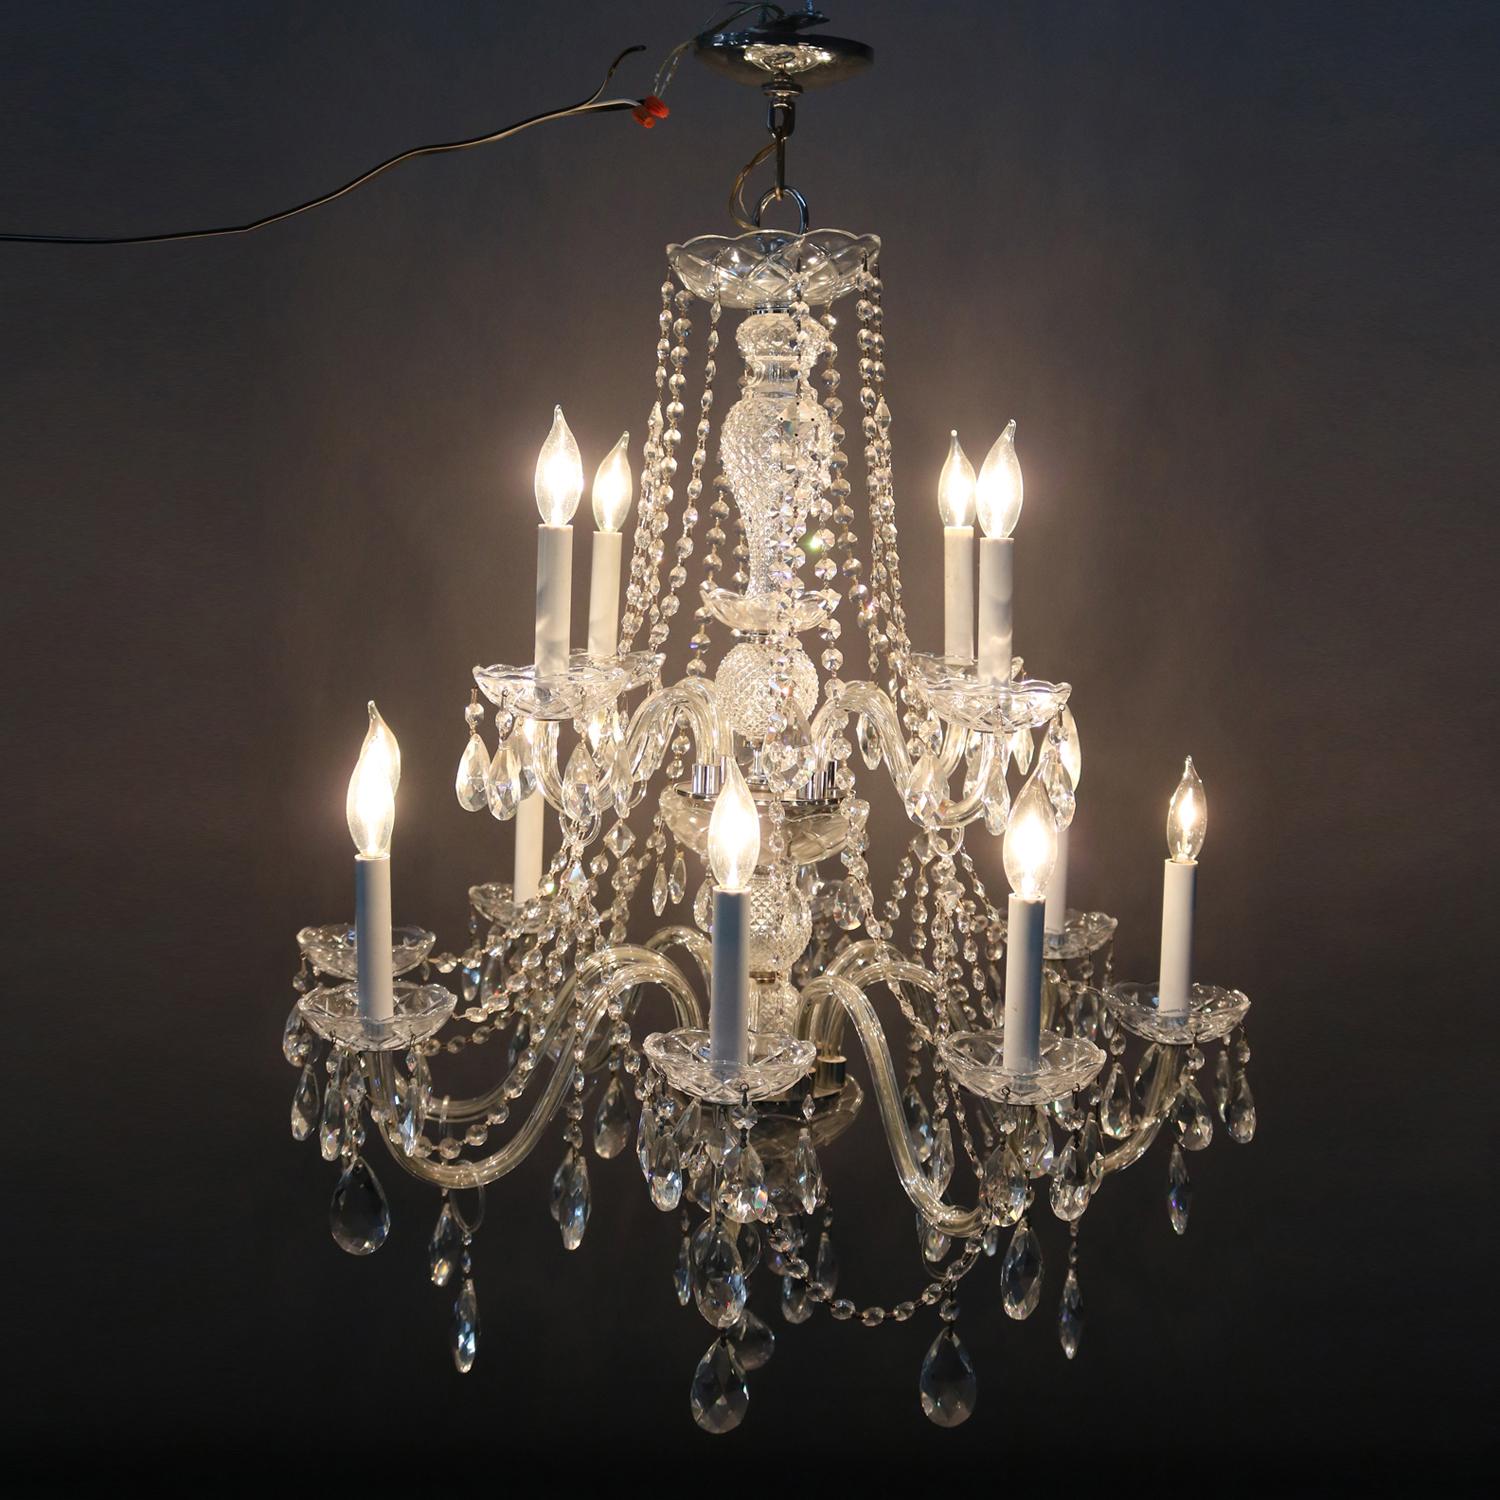 A Waterford School French style chandelier features chrome frame with two tiers of s-scroll glass arms terminating in 12 candle lights, strug and rock crystals throughout, 20th century

Measures: 39